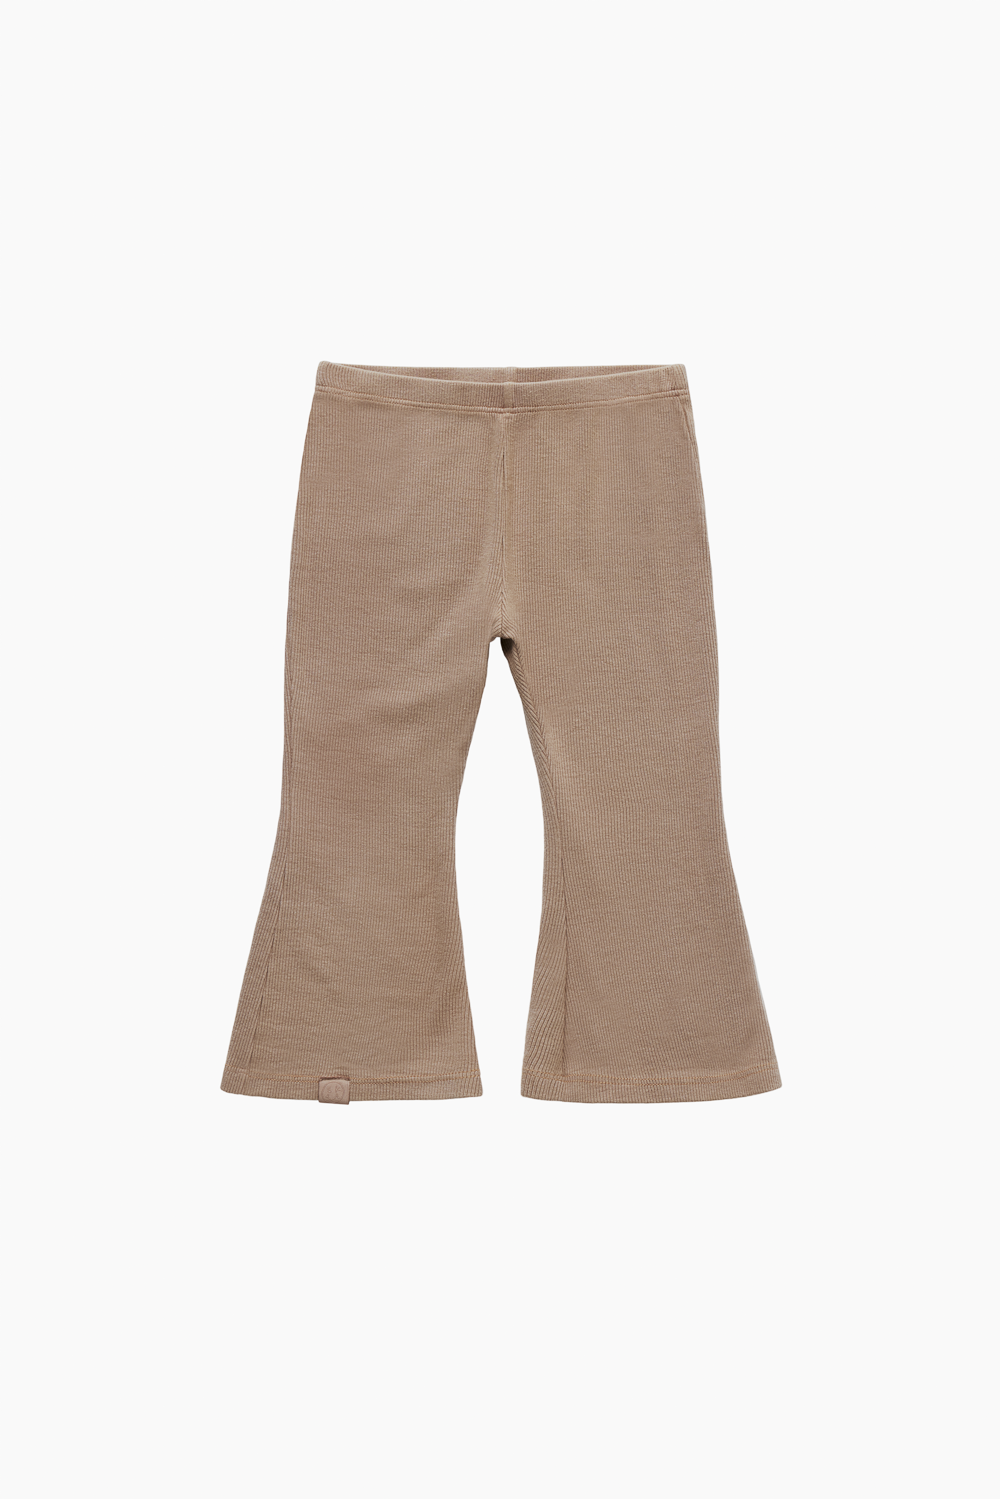 RIBBED MODAL KIDS FLARE PANTS - MAPLE